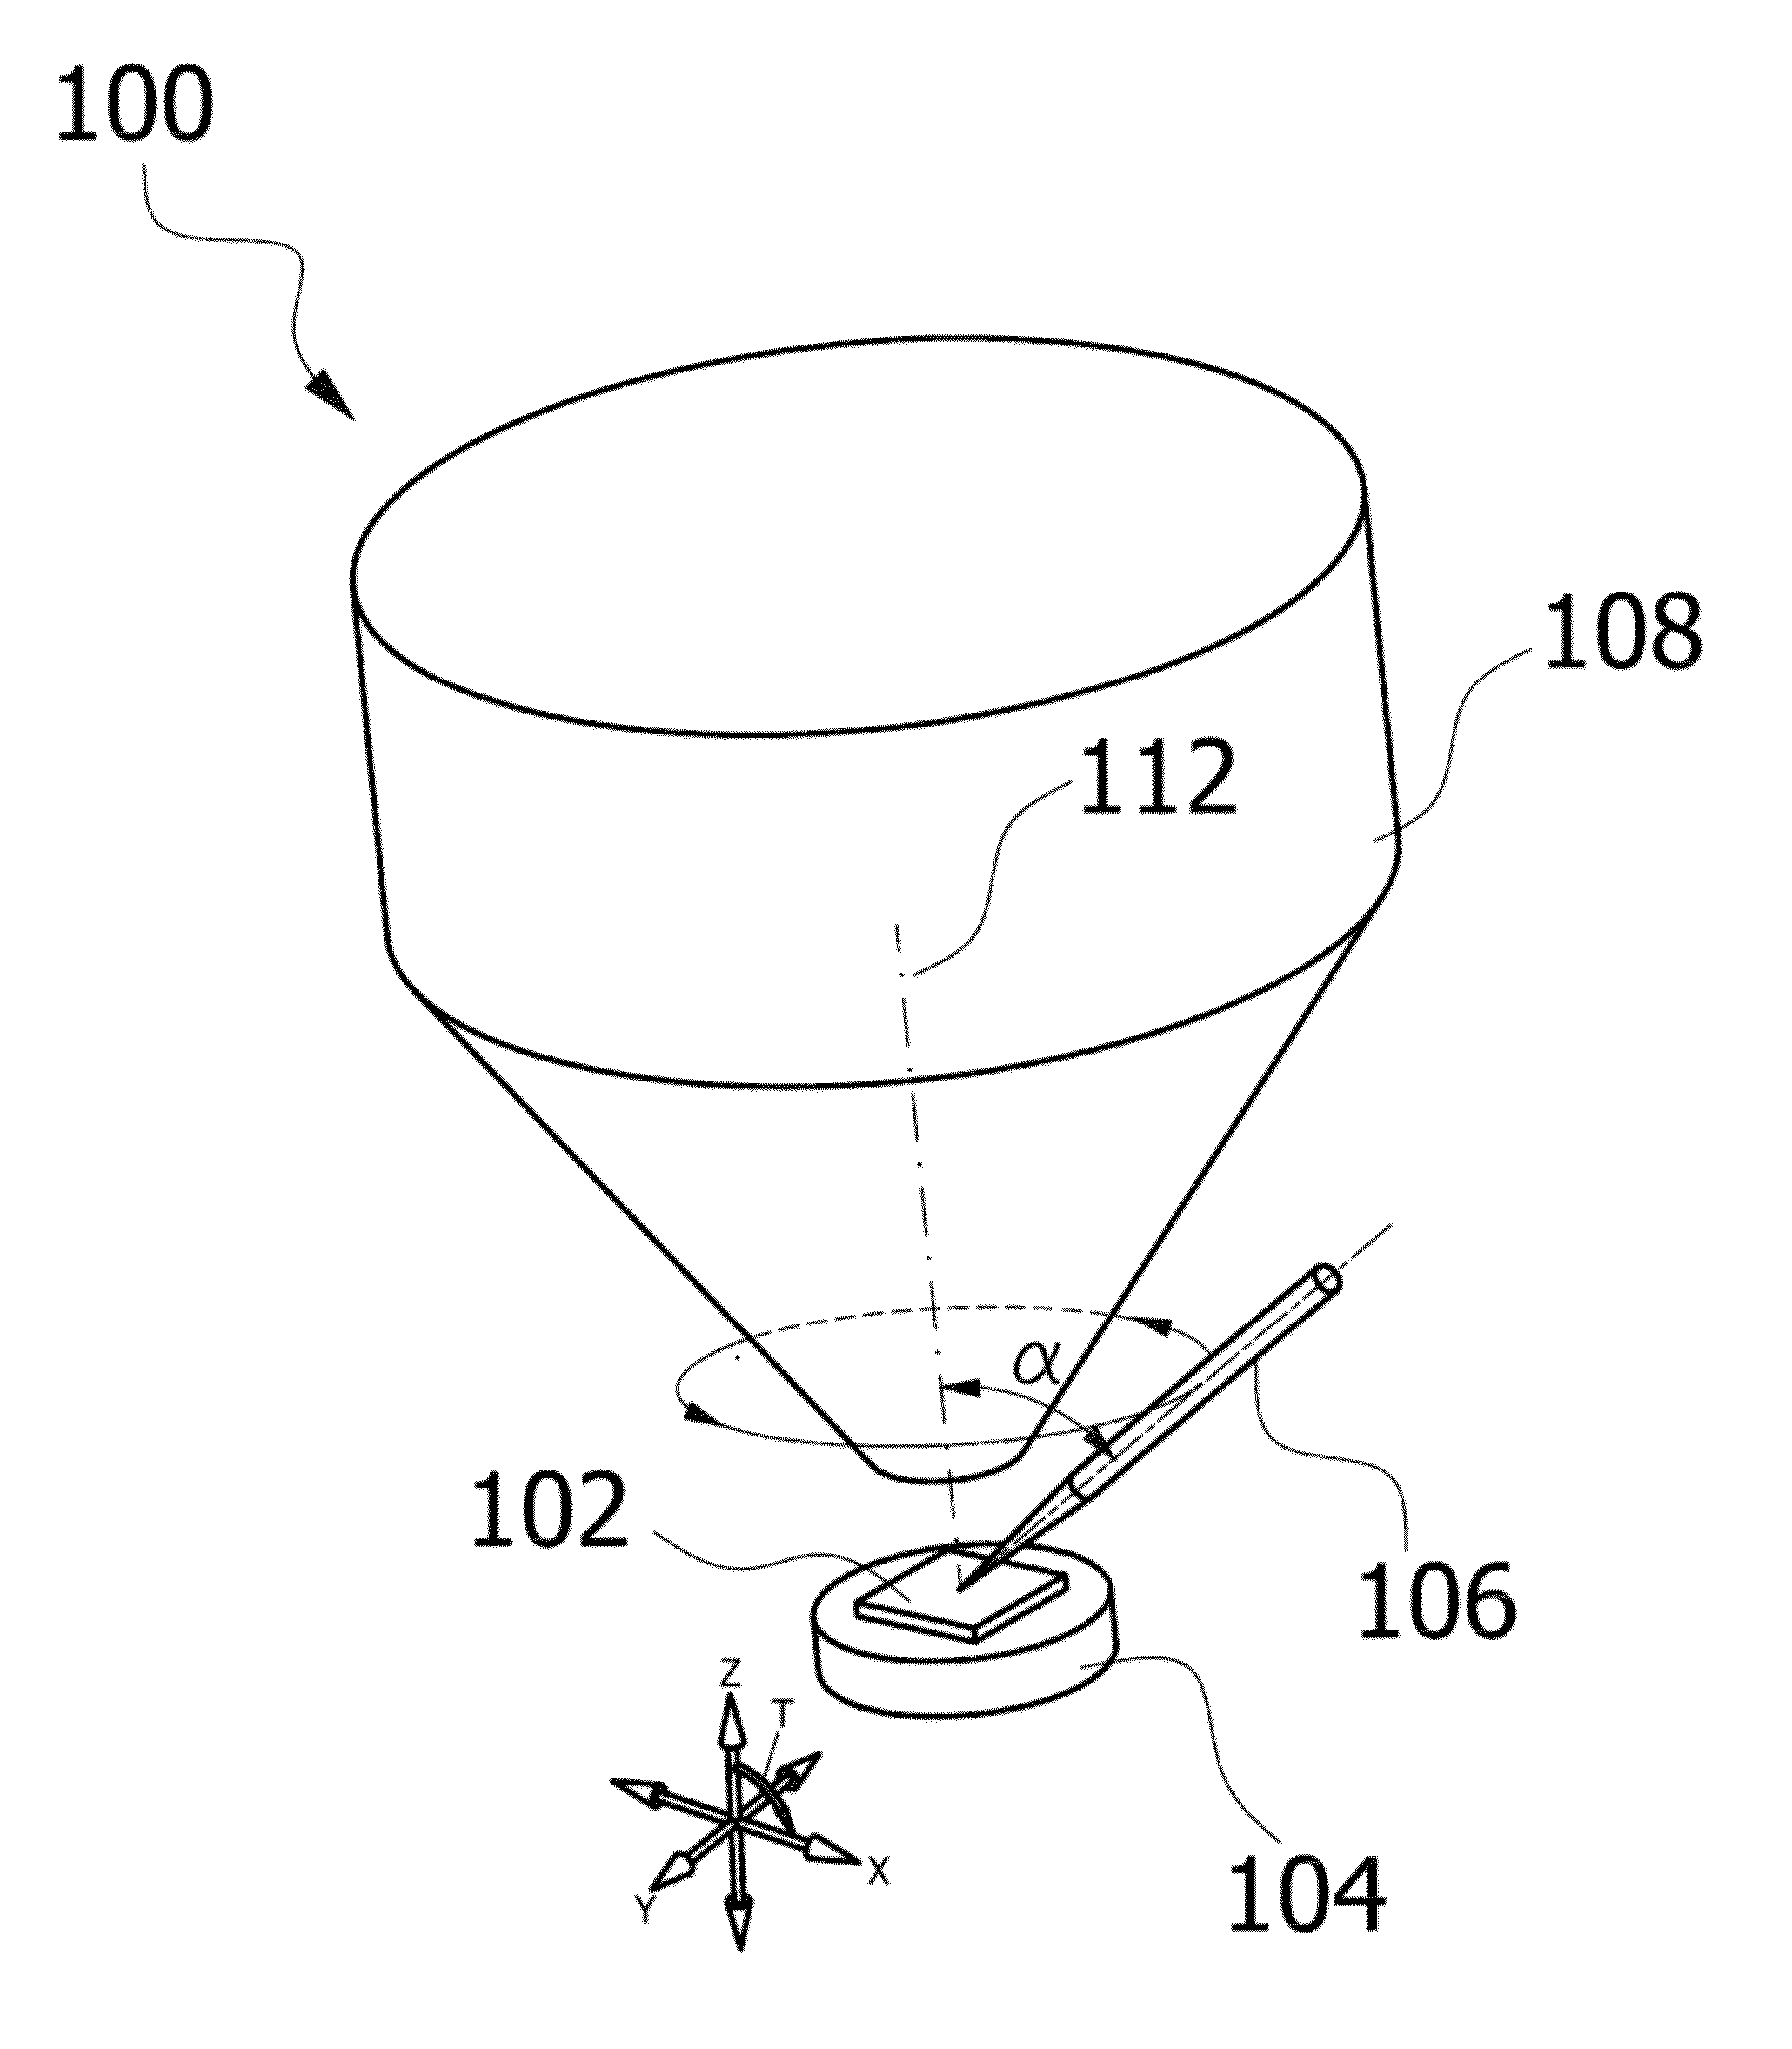 Methods, Apparatuses, Systems and Software for Treatment of a Specimen by Ion-Milling